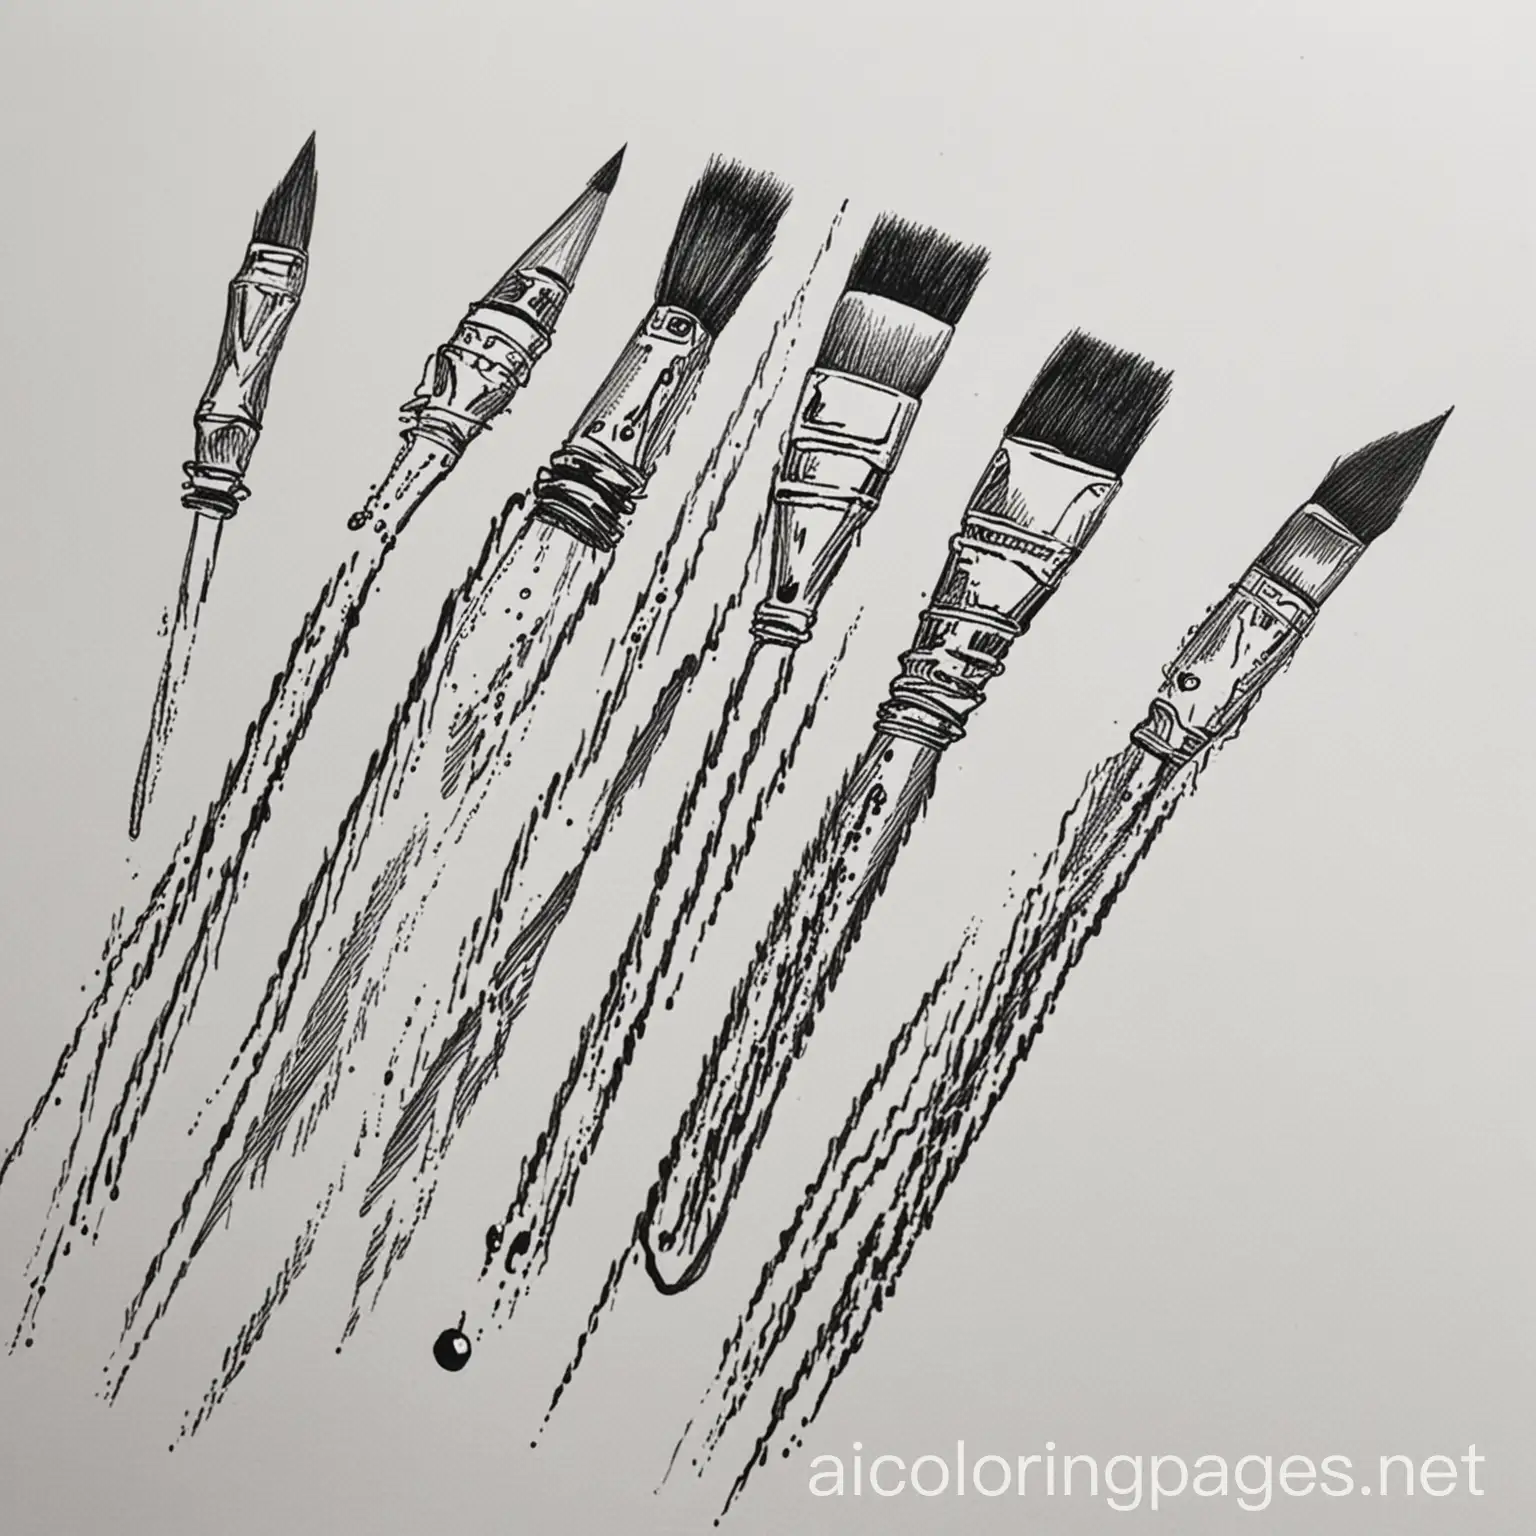 water color brushes, Coloring Page, black and white, line art, white background, Simplicity, Ample White Space. The background of the coloring page is plain white to make it easy for young children to color within the lines. The outlines of all the subjects are easy to distinguish, making it simple for kids to color without too much difficulty